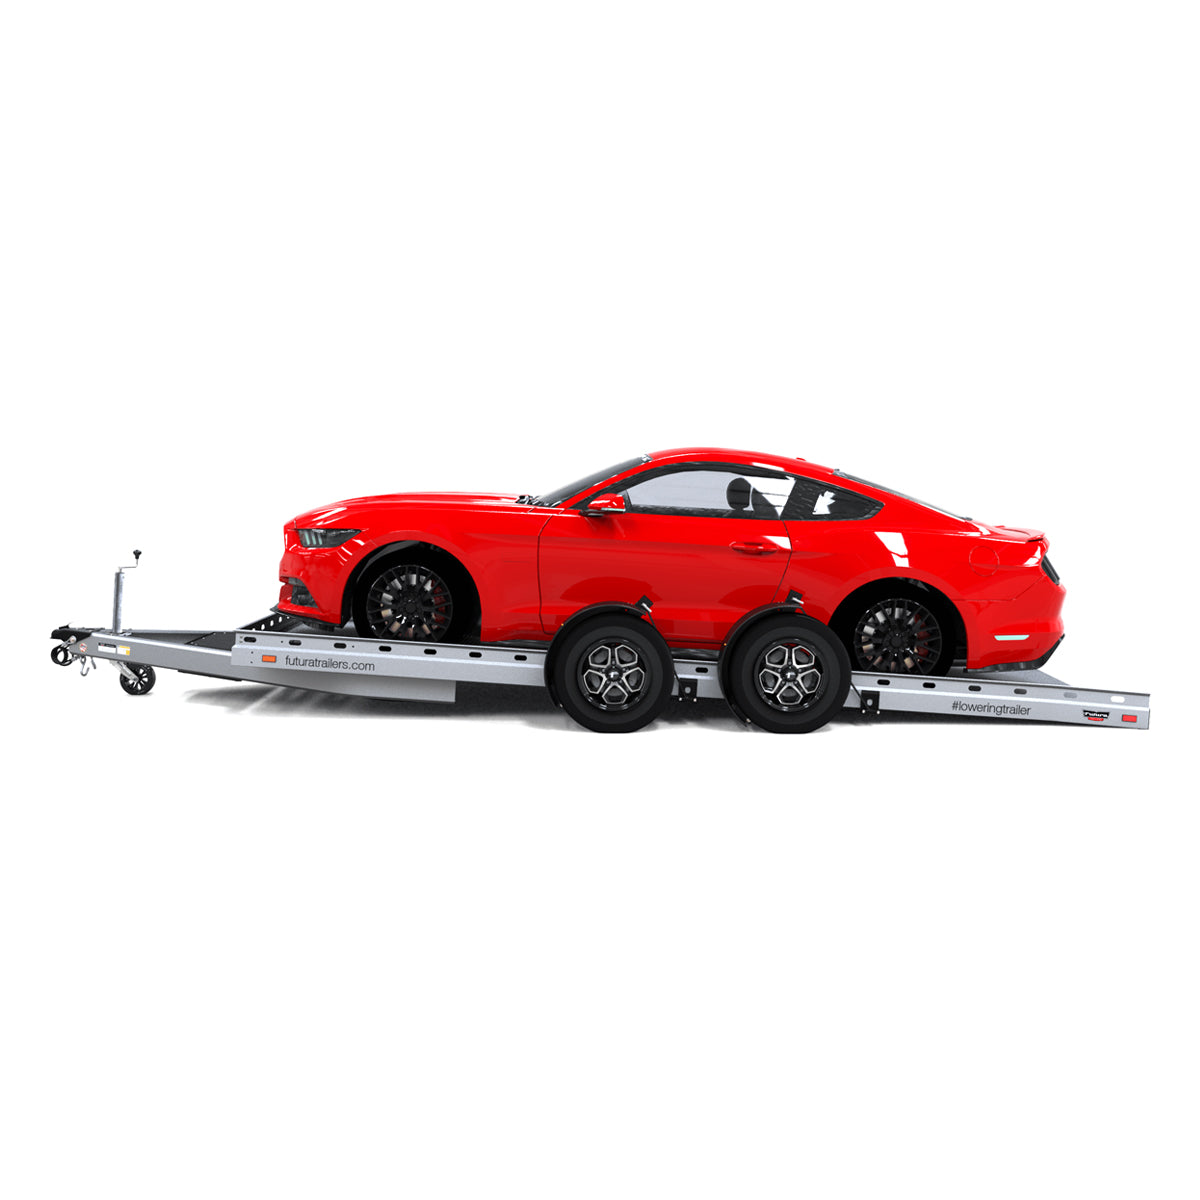 Super Sport Lowering Trailer from $22,995*